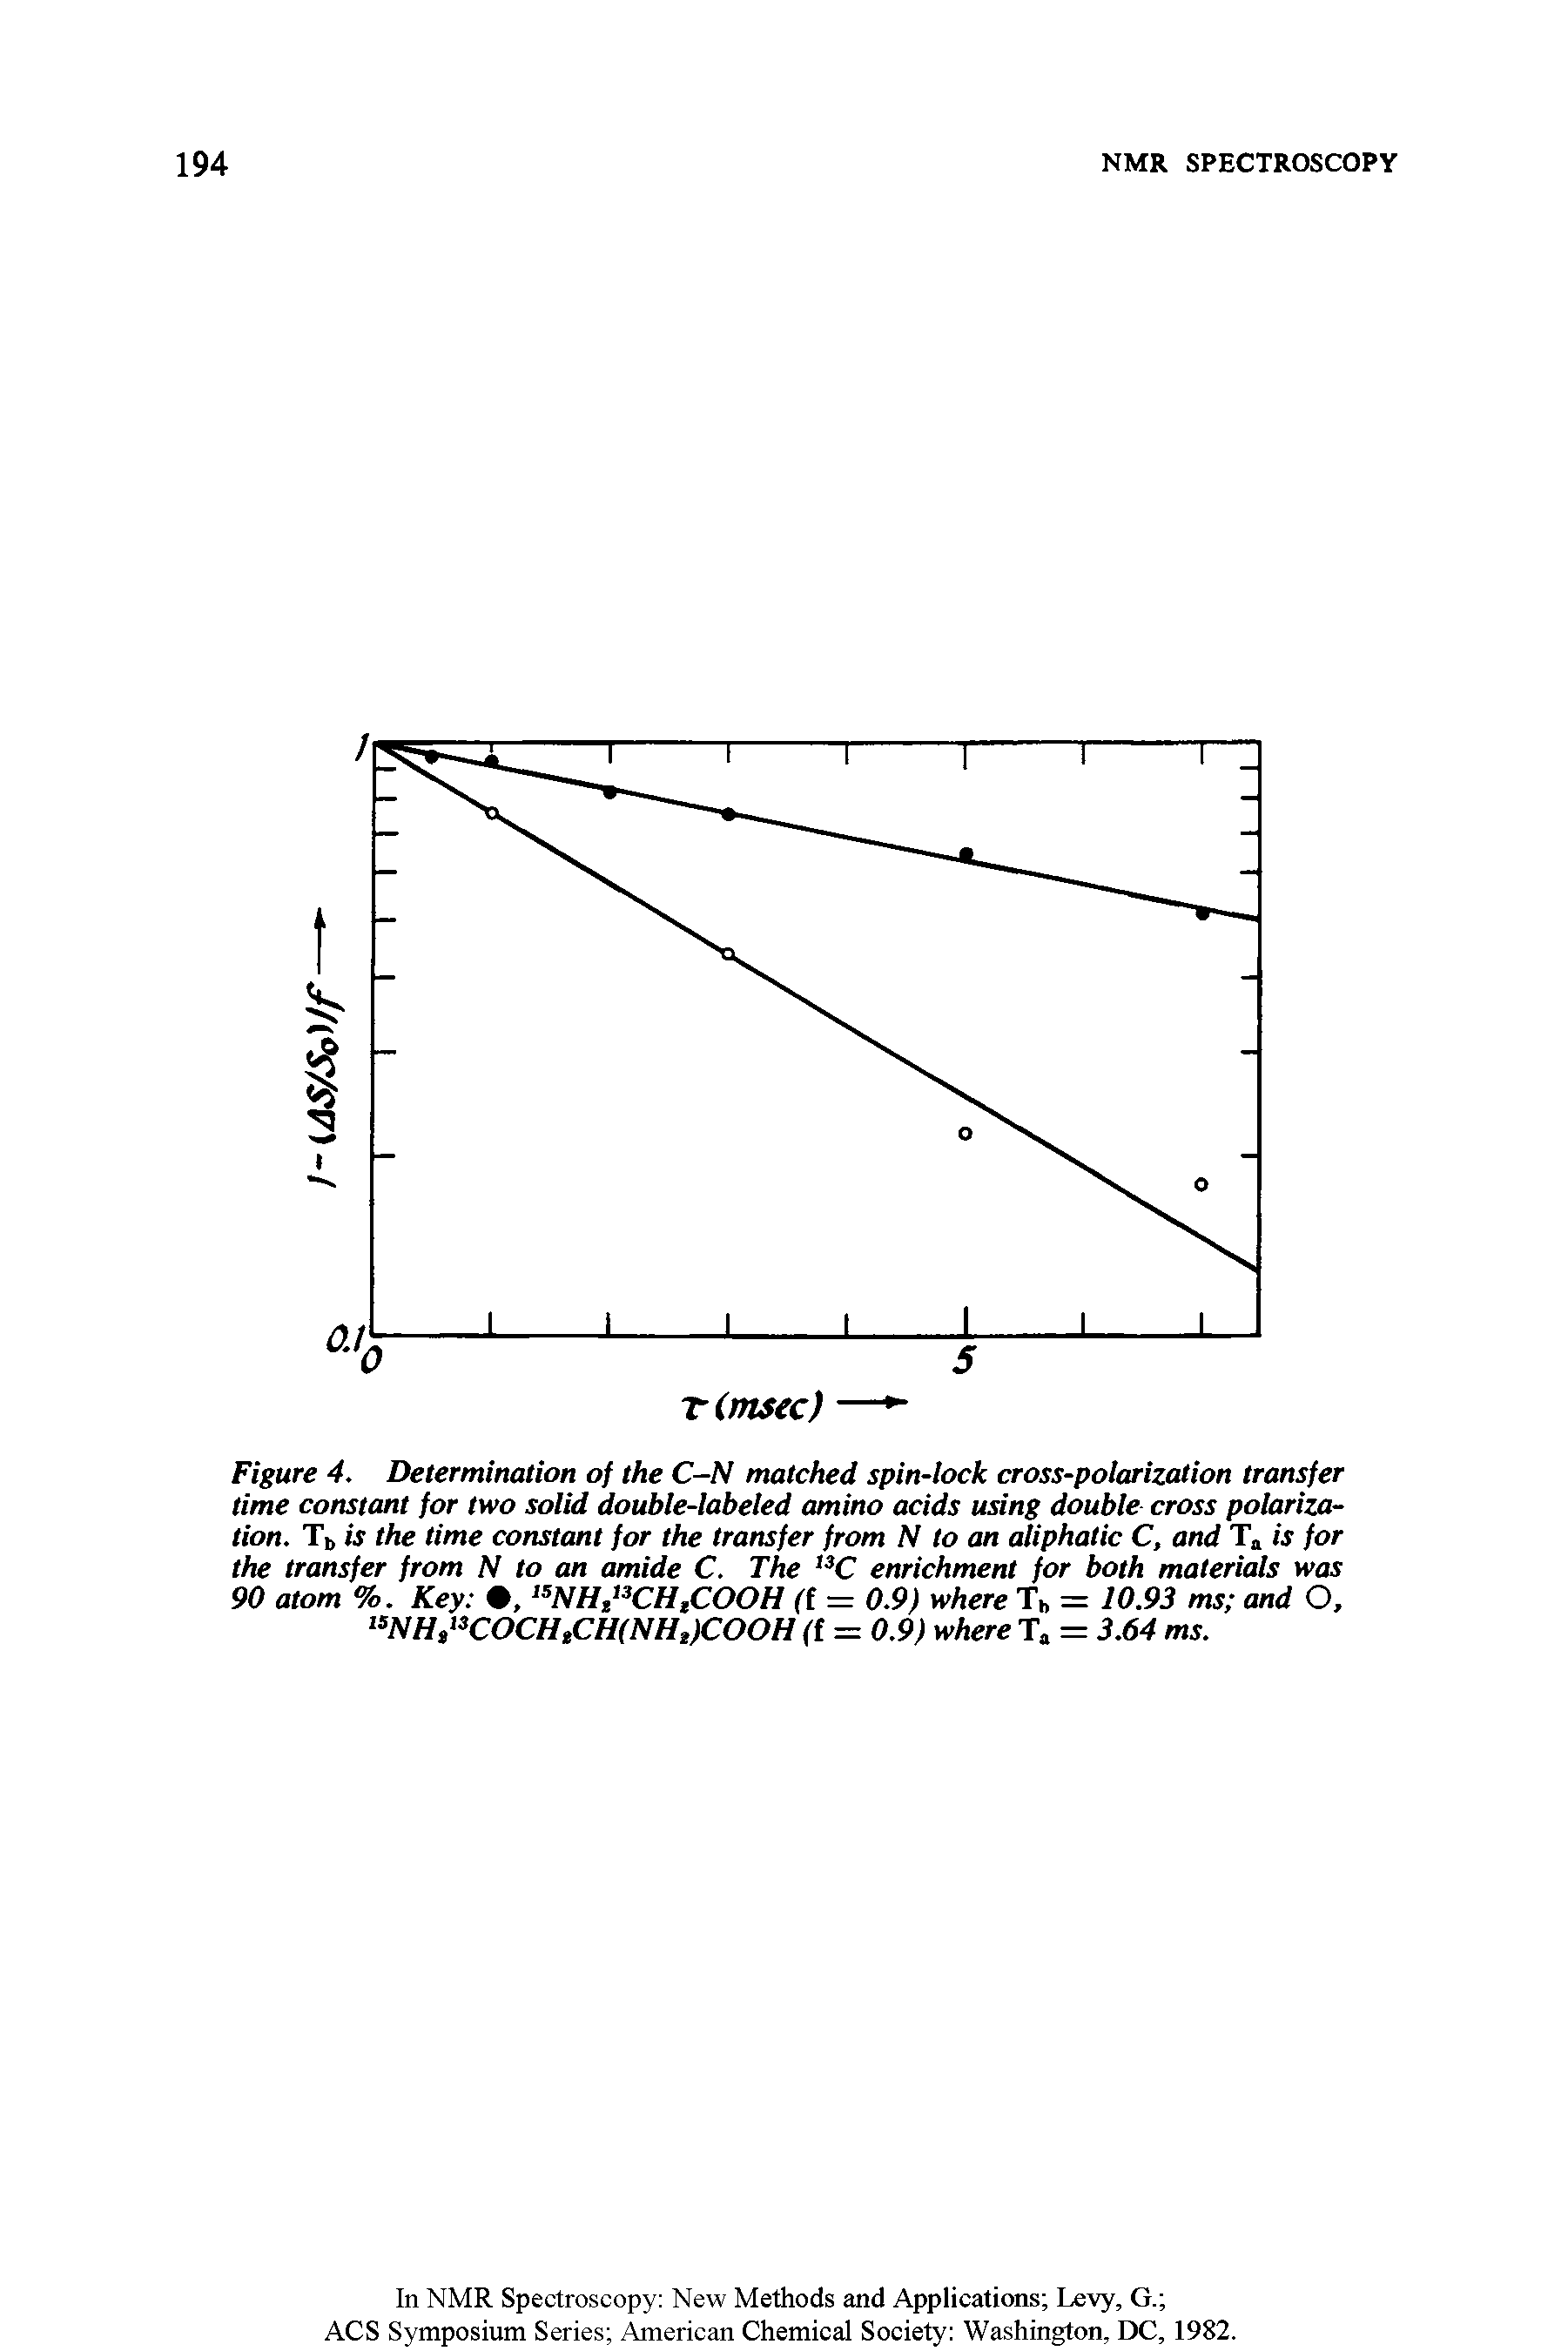 Figure 4. Determination of the C-N matched spin-lock cross-polarization transfer time constant for two solid double-labeled amino acids using double cross polarization. T > is the time constant for the transfer from N to an aliphatic C, and T. is for the transfer from N to an amide C. The enrichment for both materials was 90 atom %. Key , NHi CH,COOH (t - 0.9) where Ti, = 10.93 ms and O, NH, COCH,CH(NHi)COOH (t = 0.9) where Ta = 3.64 ms.